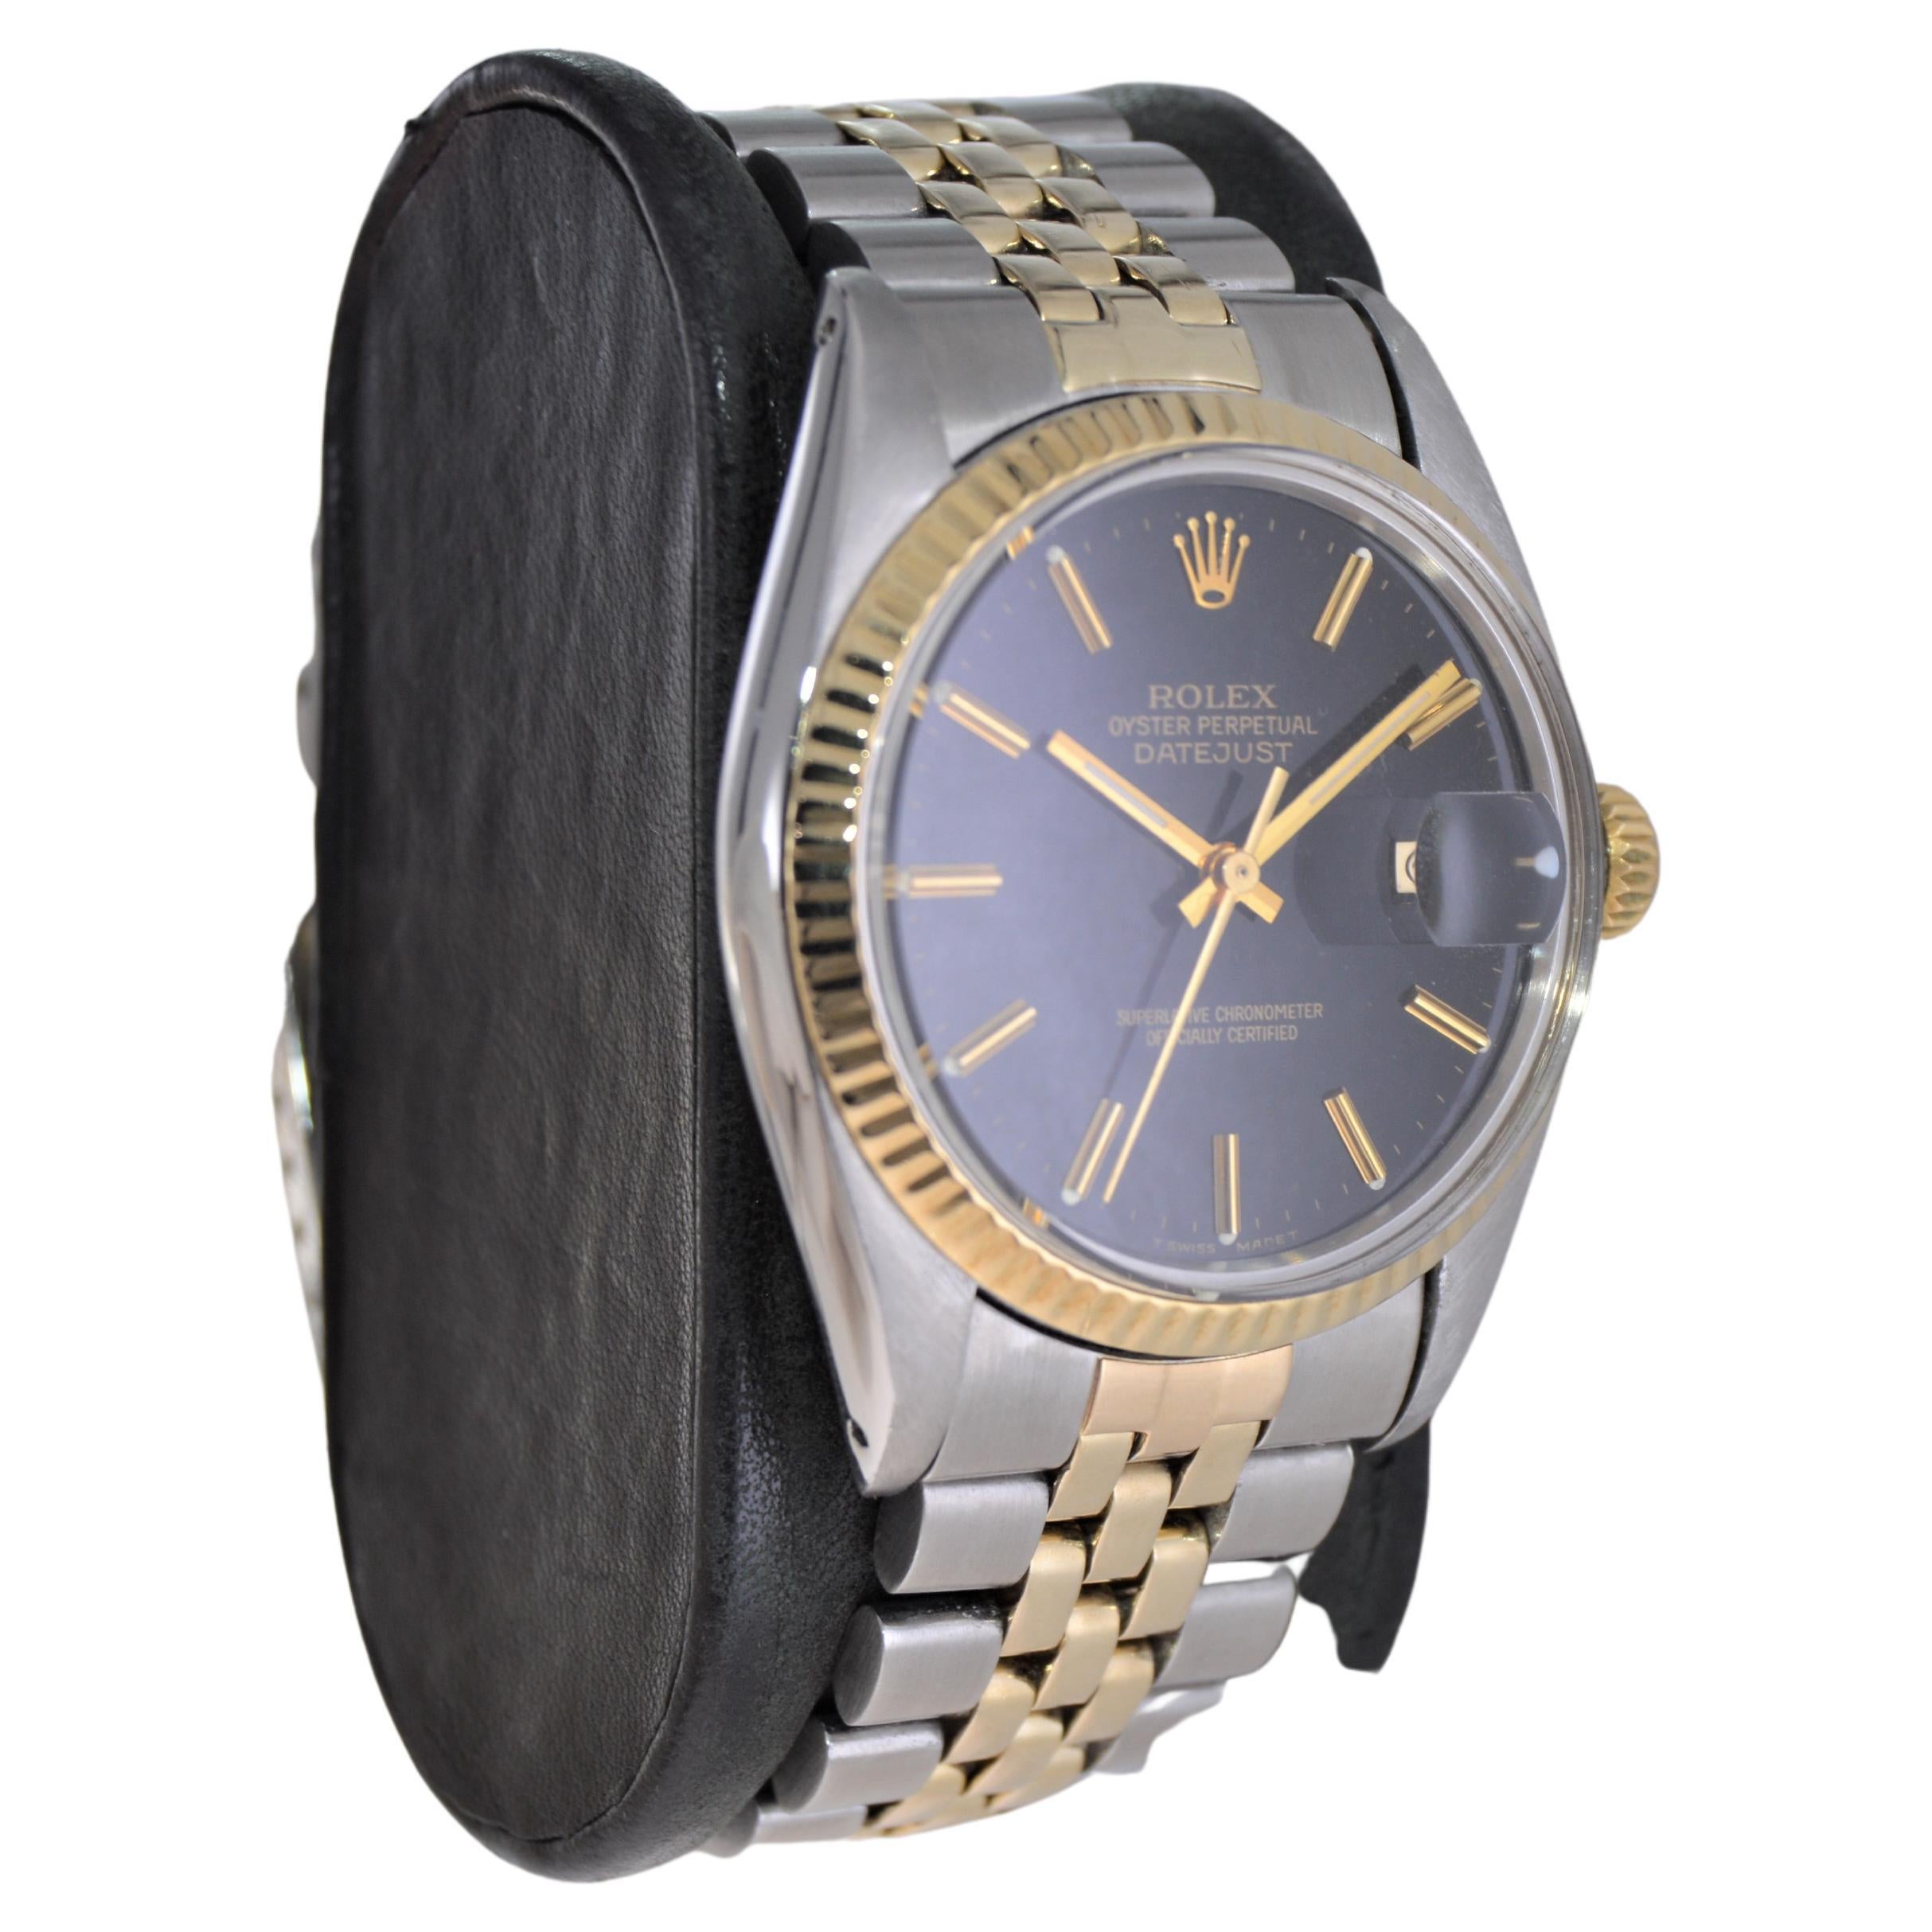 FACTORY / HOUSE: Rolex Watch Company
STYLE / REFERENCE: Oyster Perpetual Datejust / Reference 16000
METAL / MATERIAL: Stainless Steel & White Gold
CIRCA / YEAR: 1980's
DIMENSIONS / SIZE: Length 44mm X Diameter 36mm
MOVEMENT / CALIBER: Perpetual